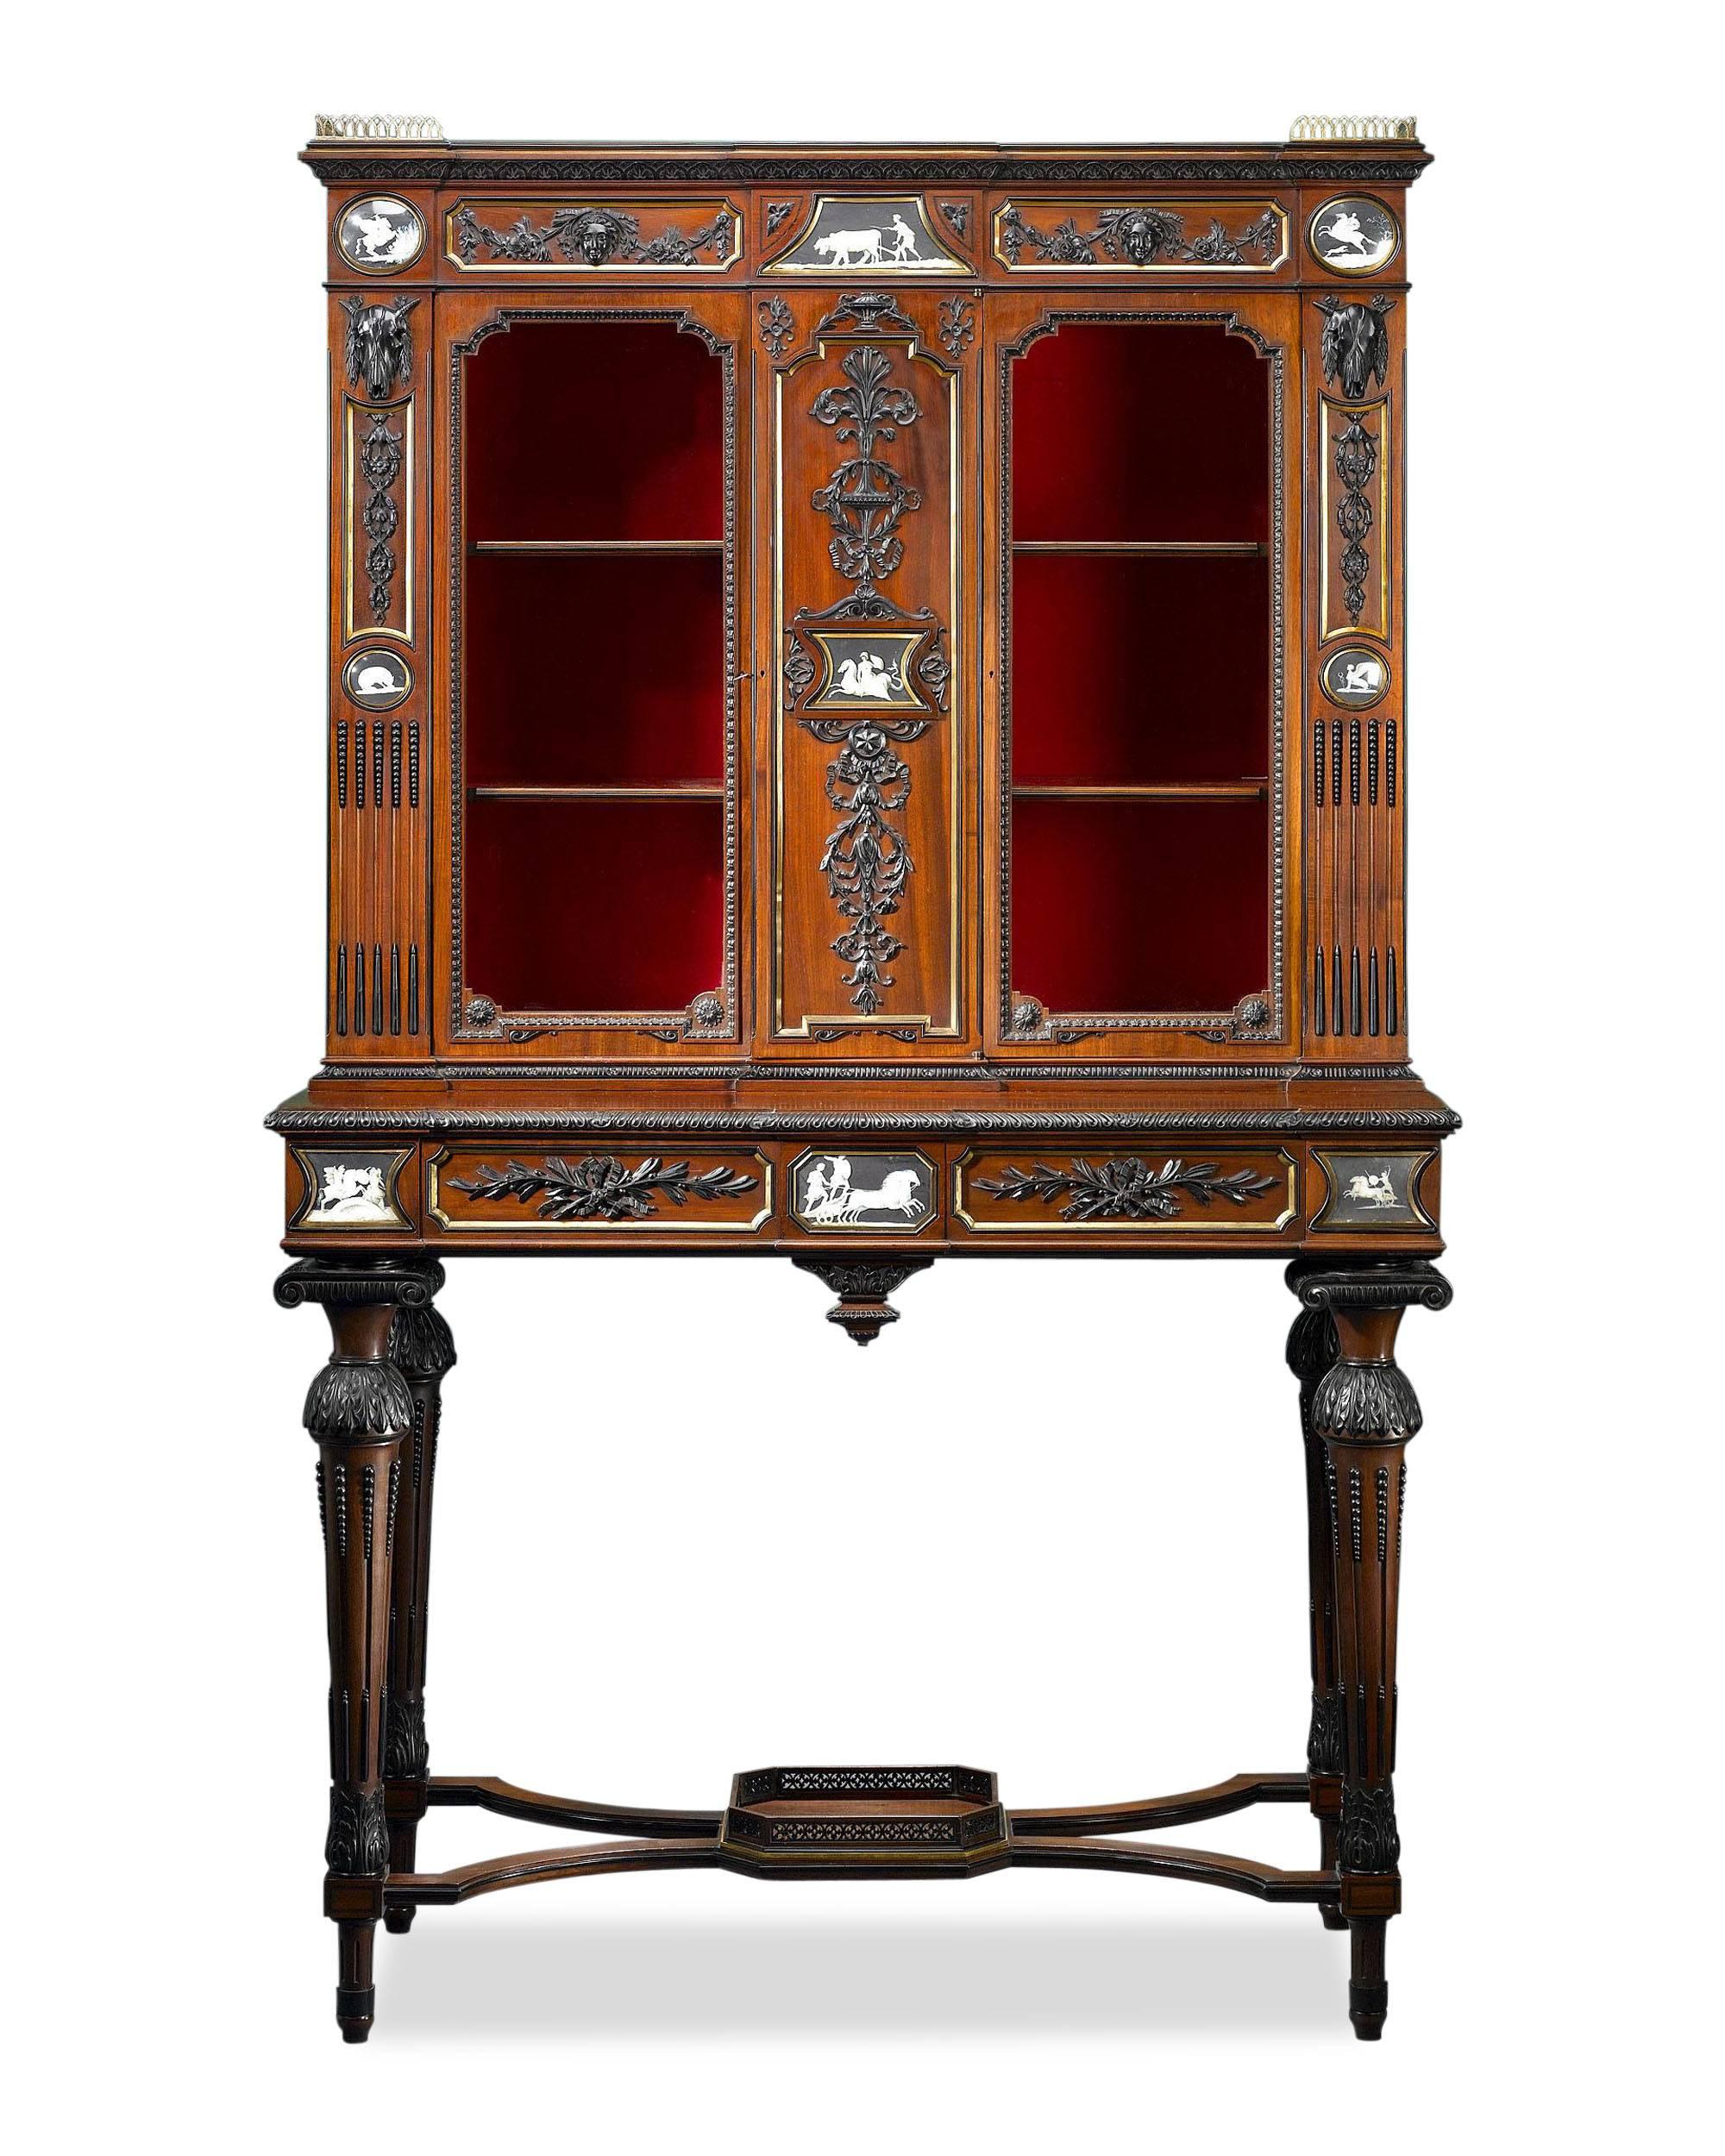 This important manhogany cabinet by English maker William Bertram of Dean Street, Soho, is crafted in the Etruscan style and handsomely decorated with wonderful hand-painted plaques and dramatic carved ebony accents. Each of the plaques depicts a